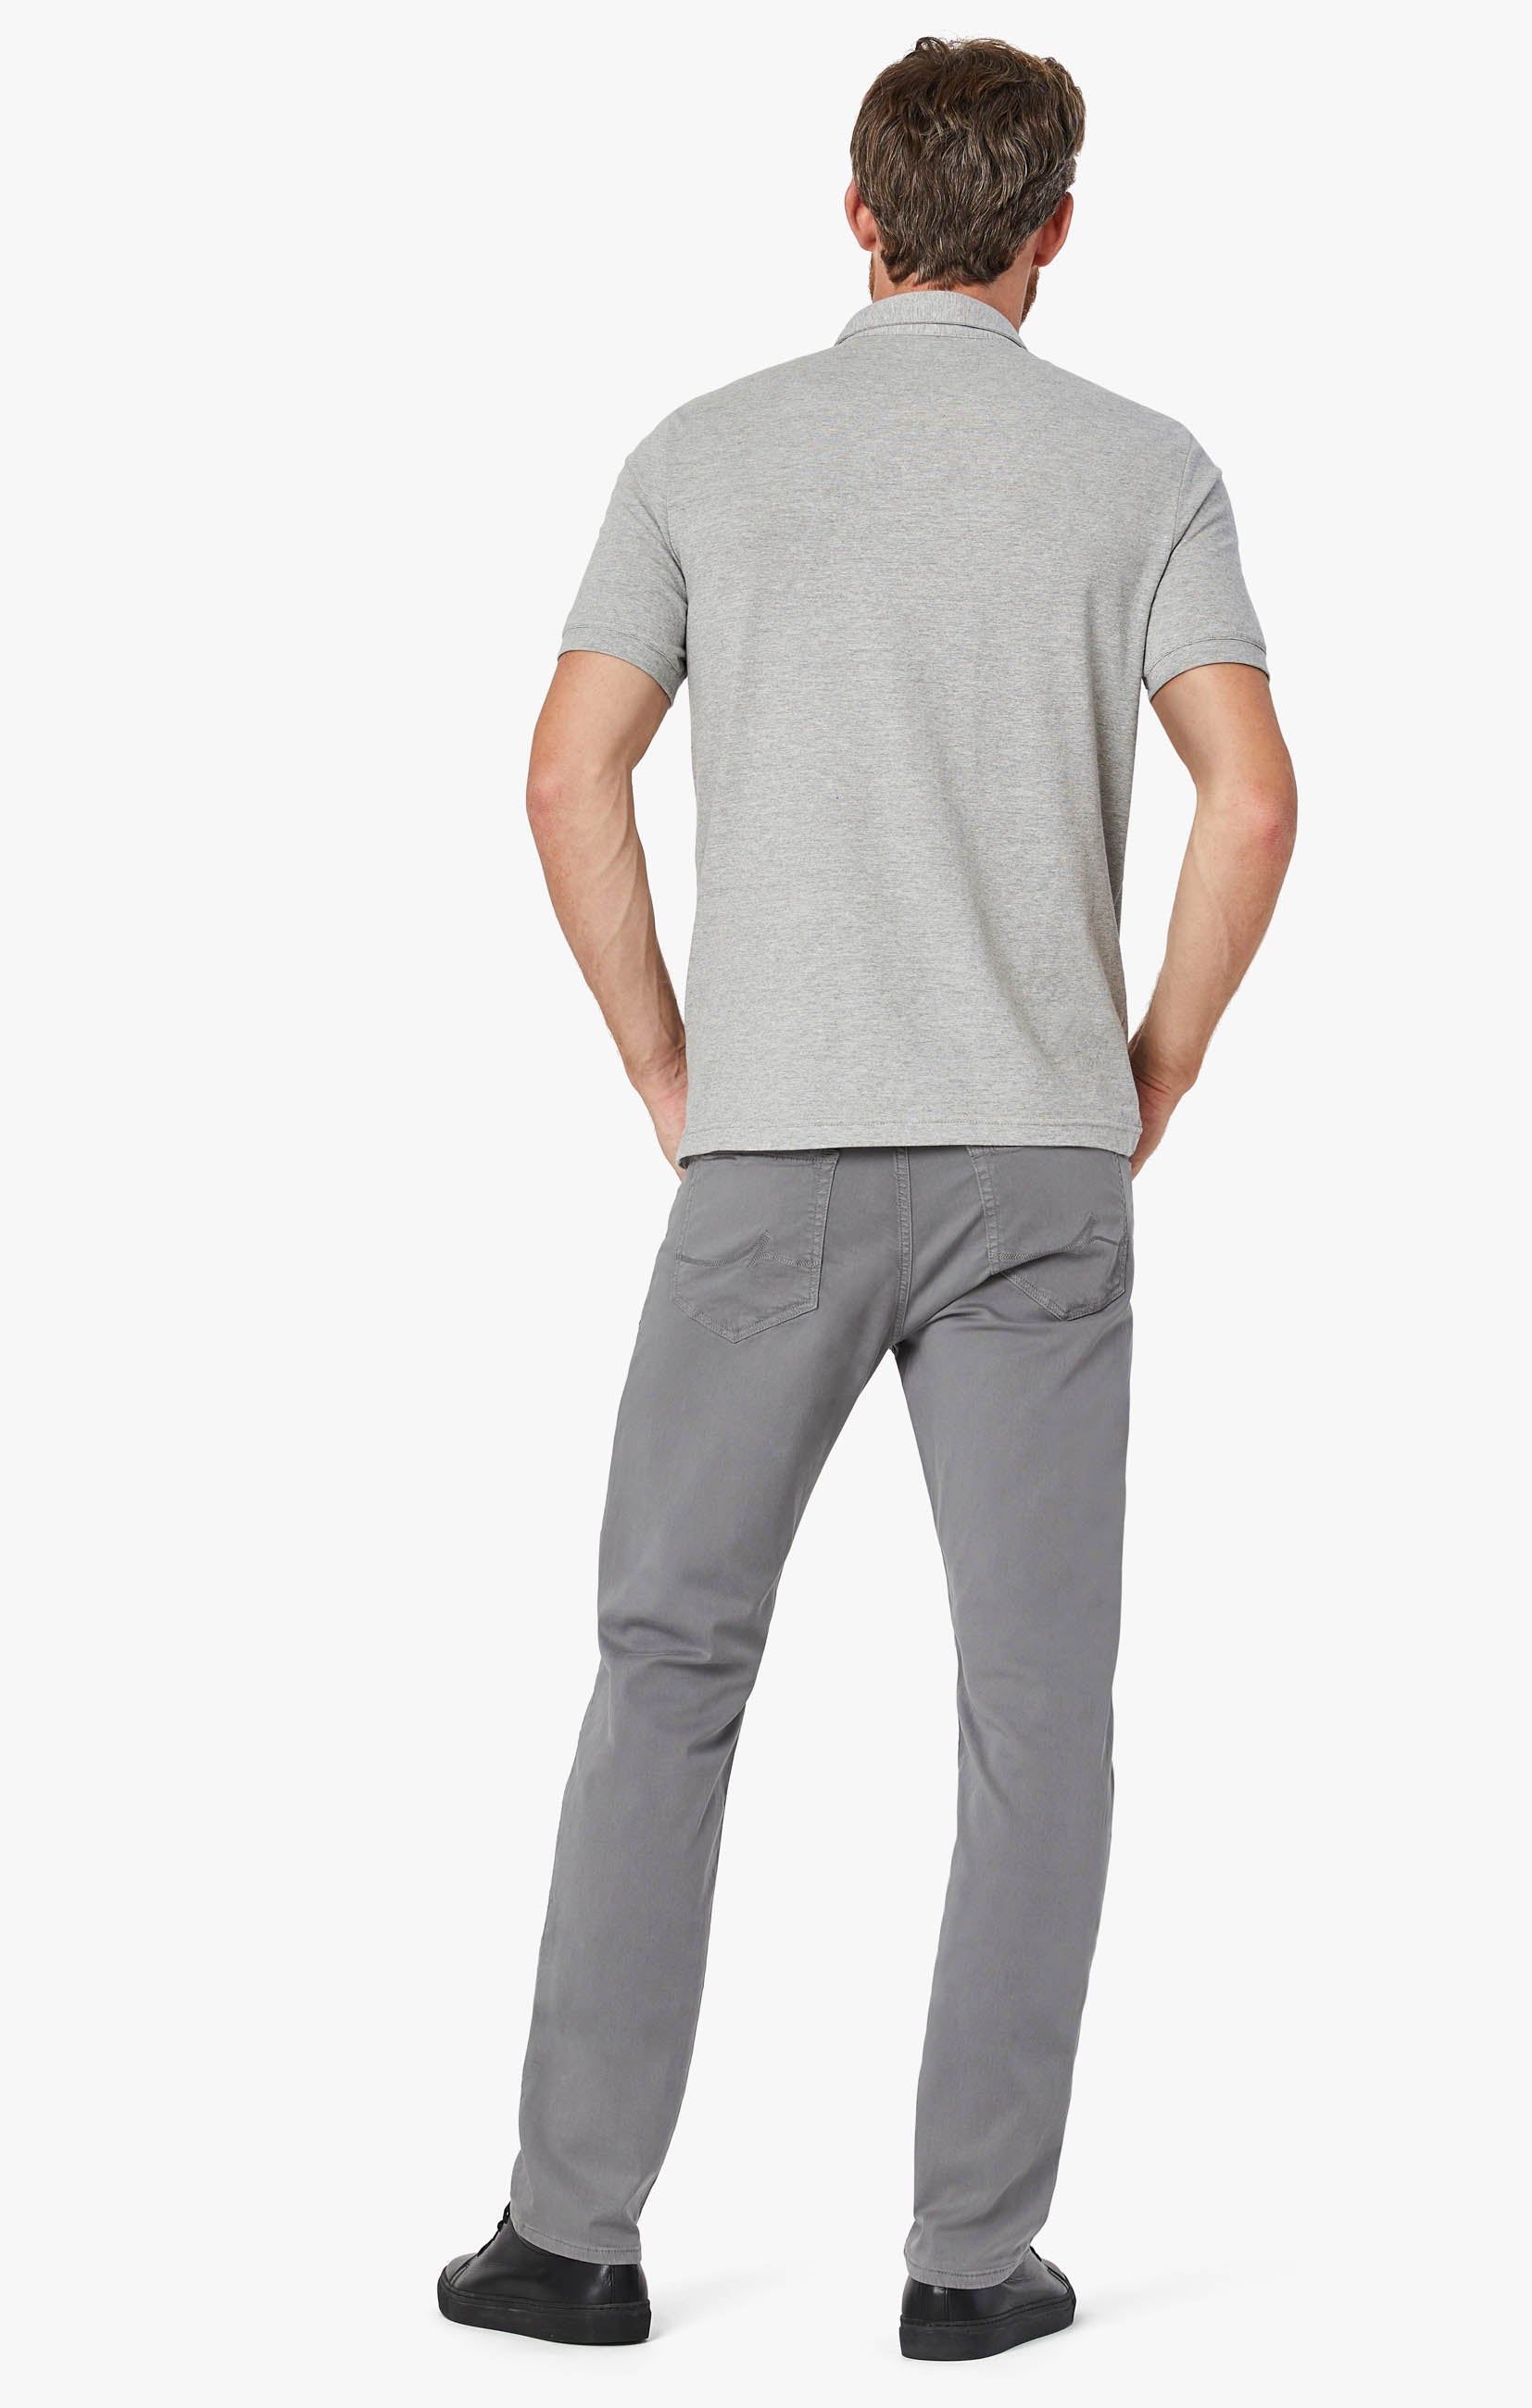 Courage Straight Leg Pants in Shark Twill Image 8